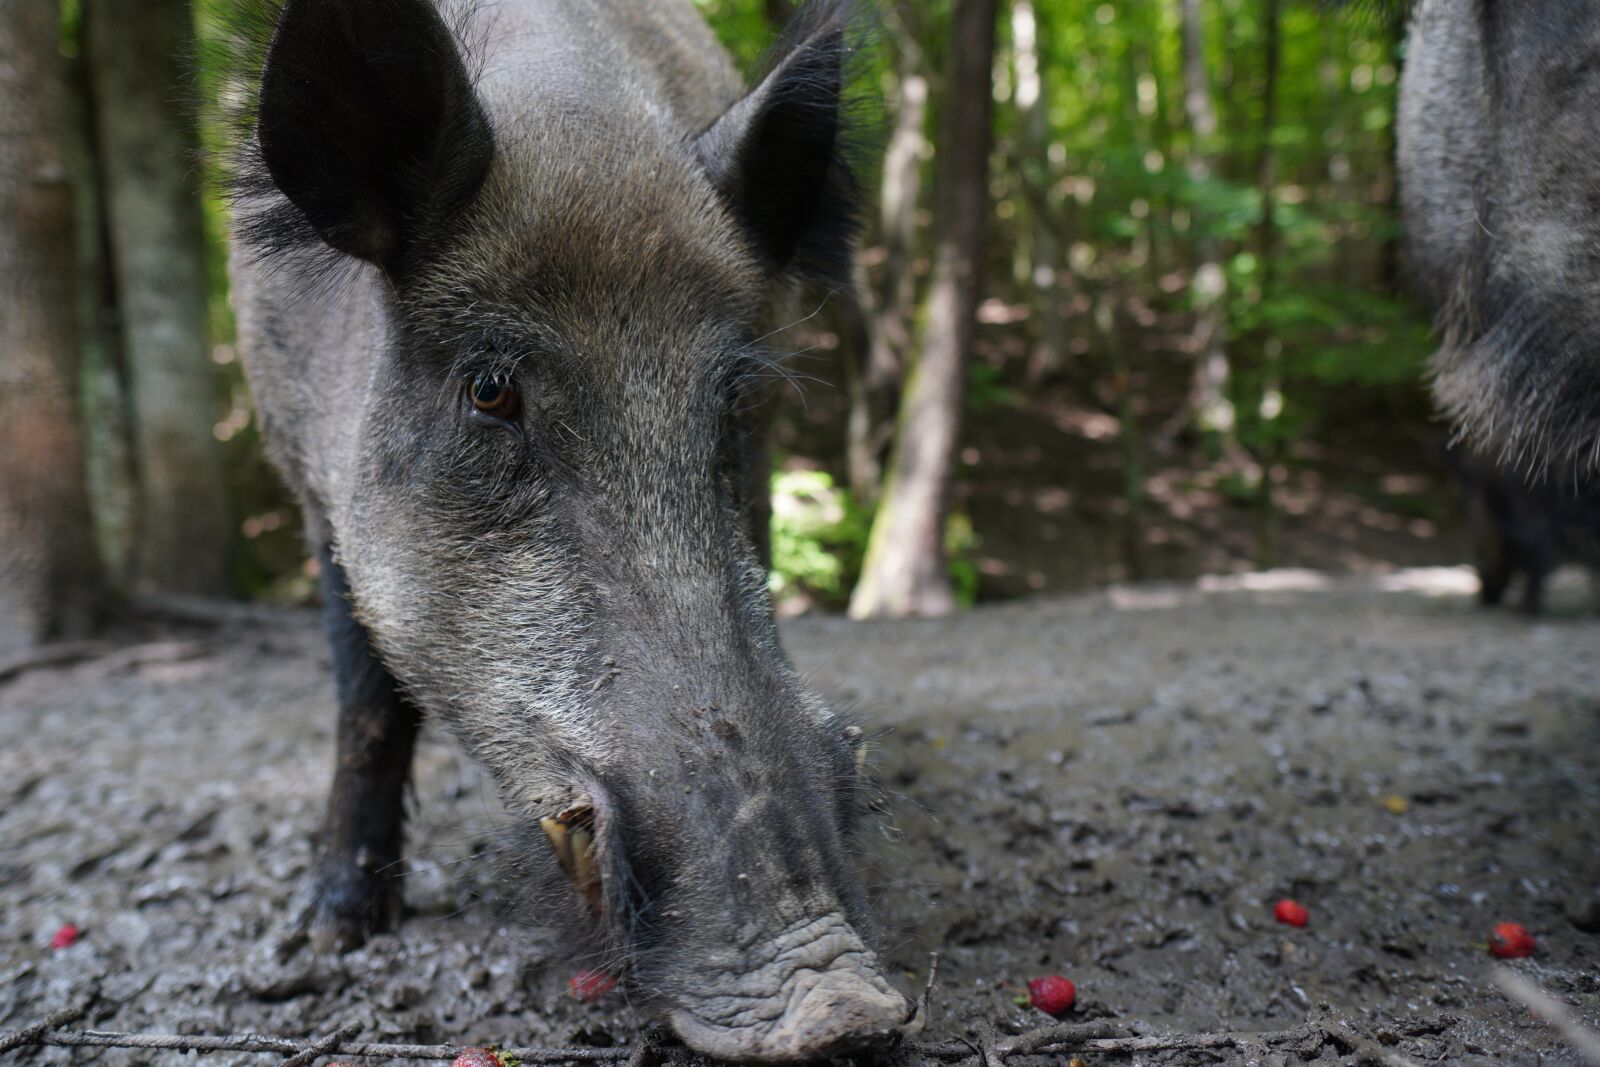 Sony a6400 sample photo. Wild boar, nature, pig photography